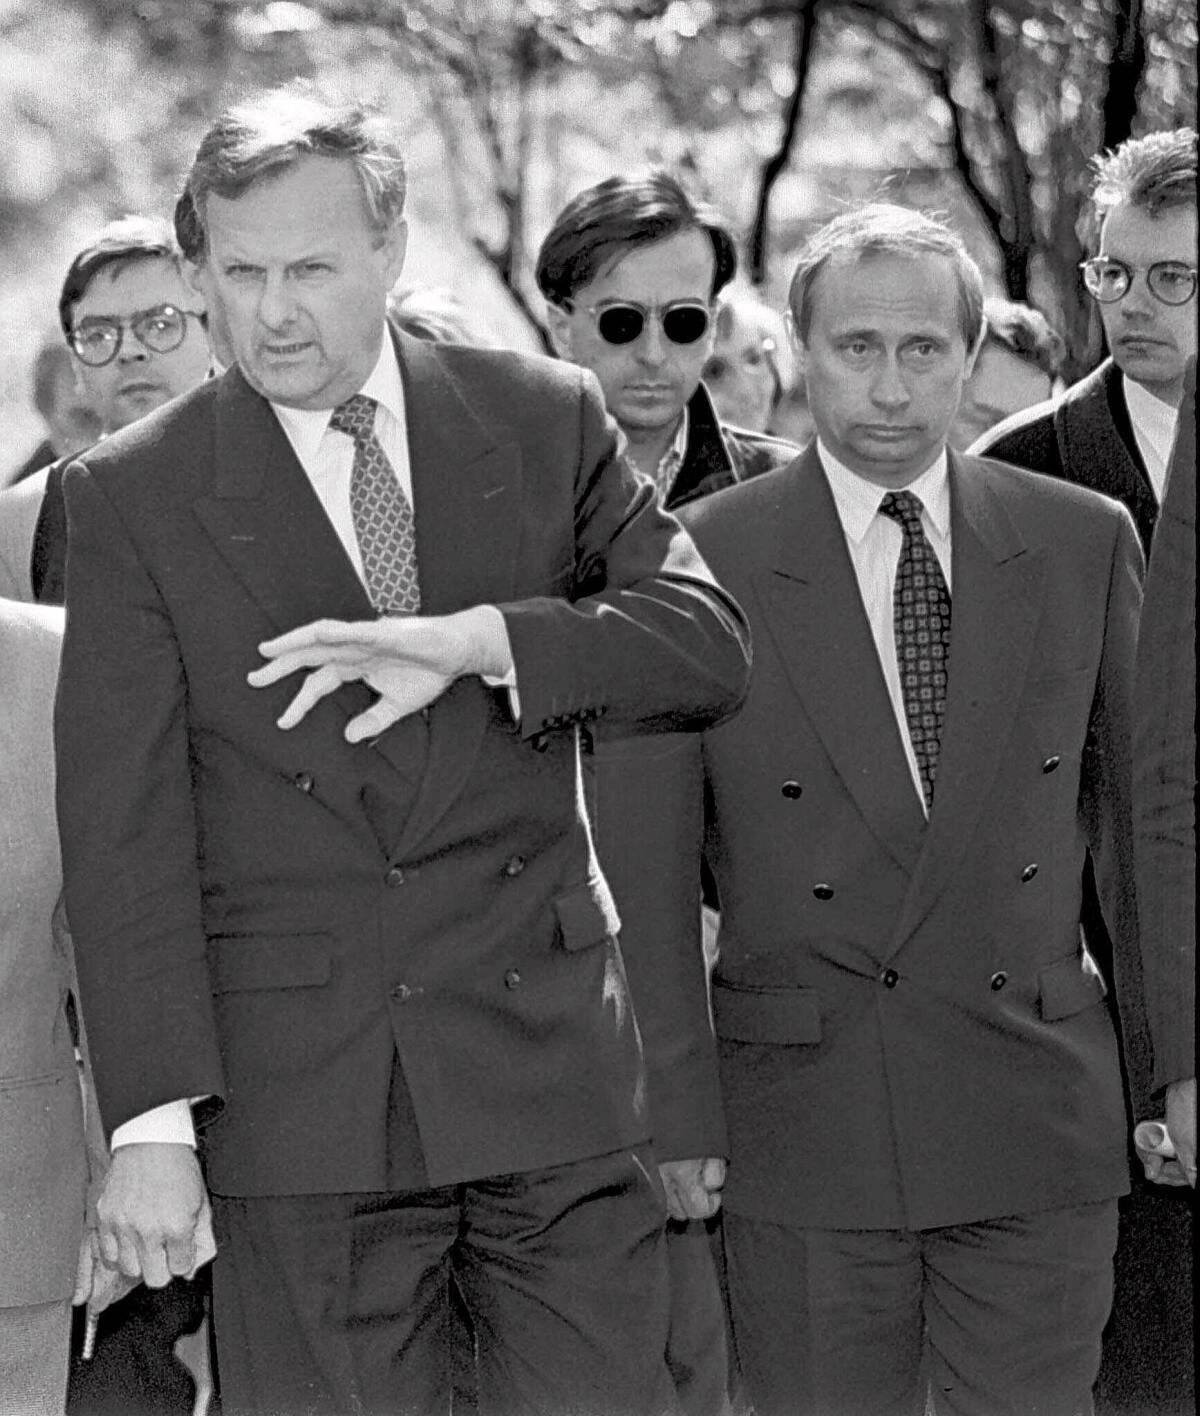 In 1994, Anatoly Sobchak, then mayor of St. Petersburg, stands with Vladimir Putin, his deputy mayor. Sobchak's daughter is running against Putin in Sunday's election.